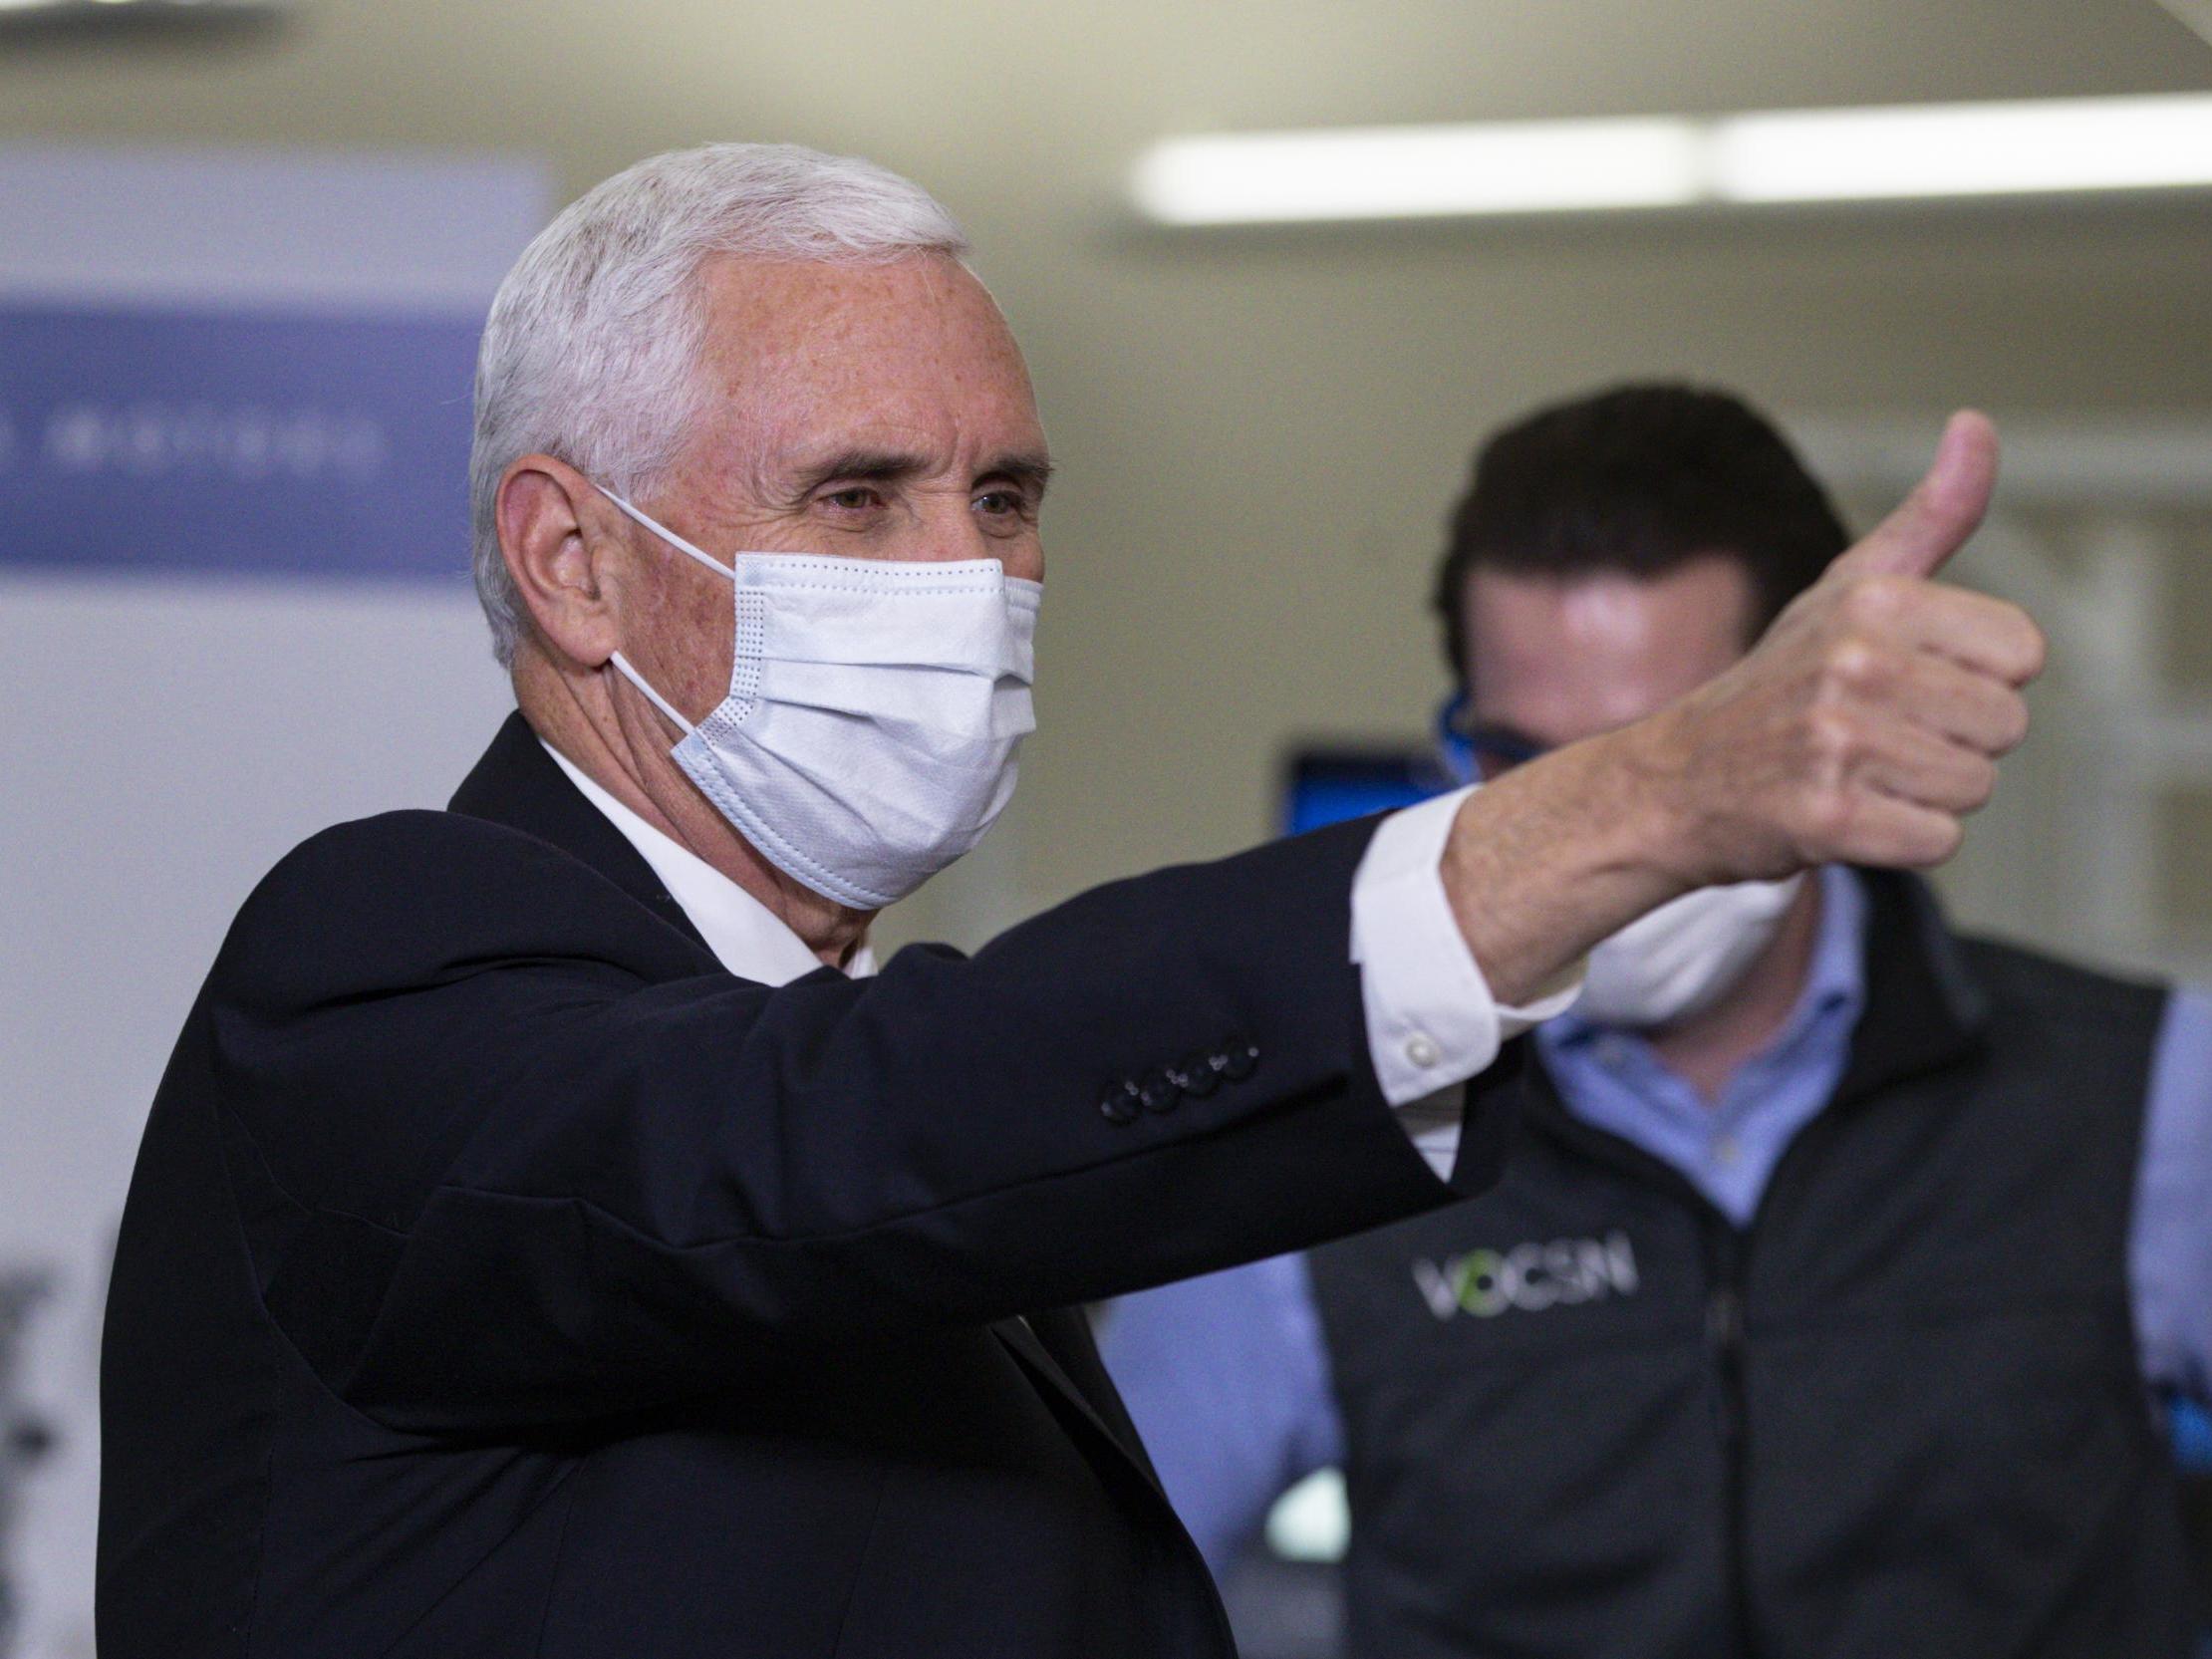 Pence faced criticism for not wearing a mask in Minnesota, but was pictured in Indiana fully covered up